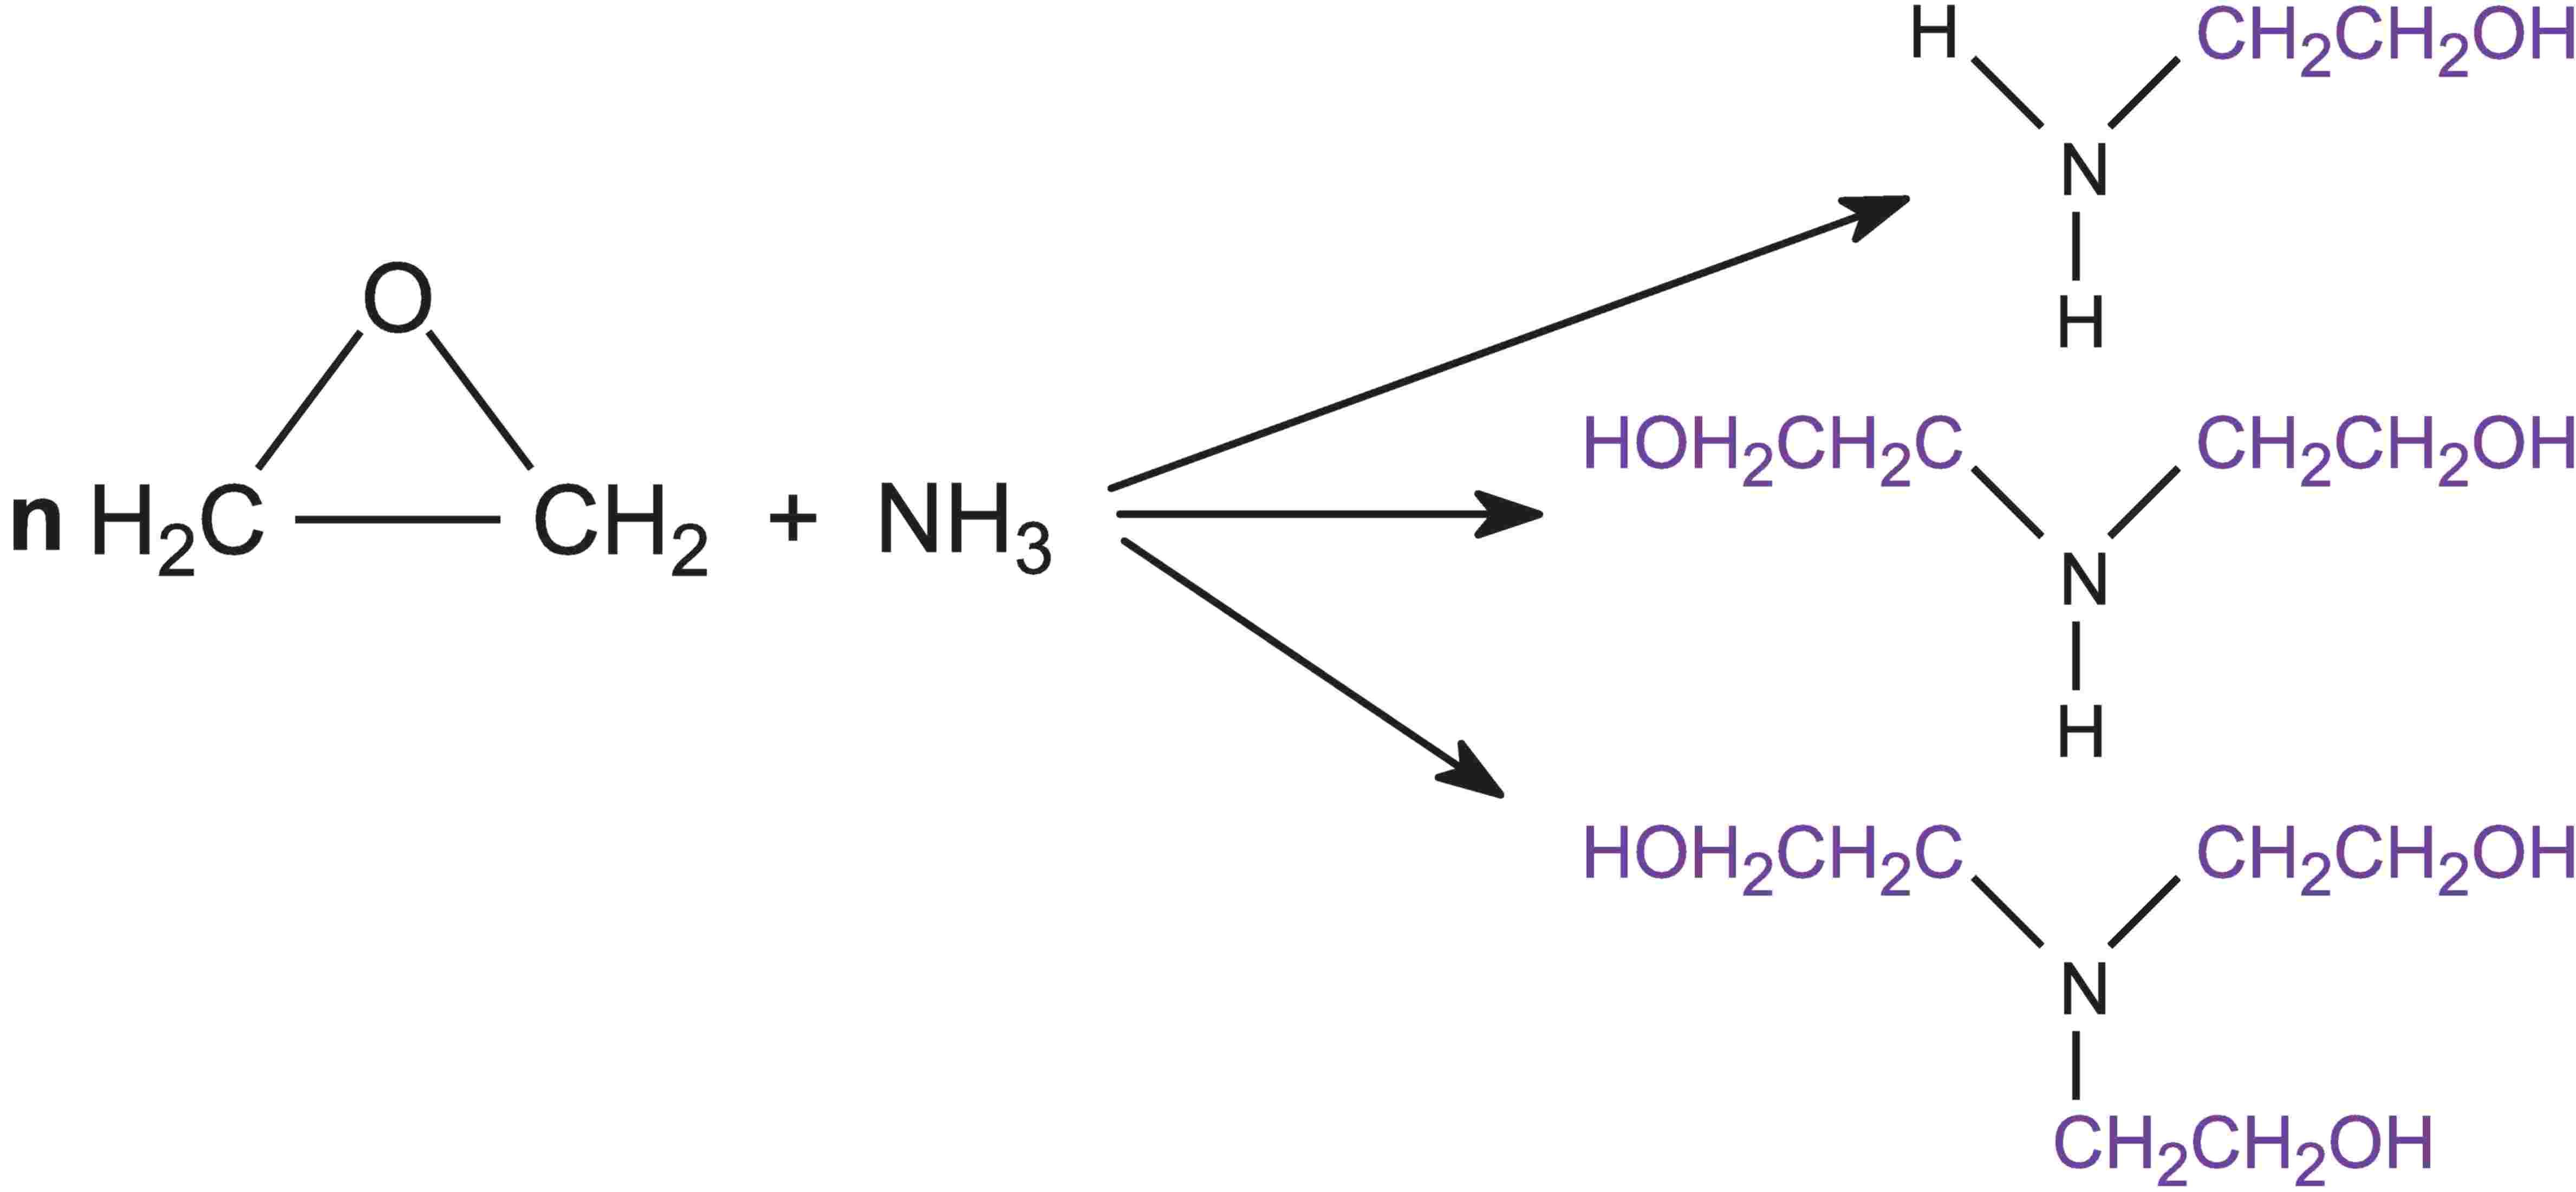 Equations illustrating reactions of epoxyethane with ammonia to orm a series of ethanolamines